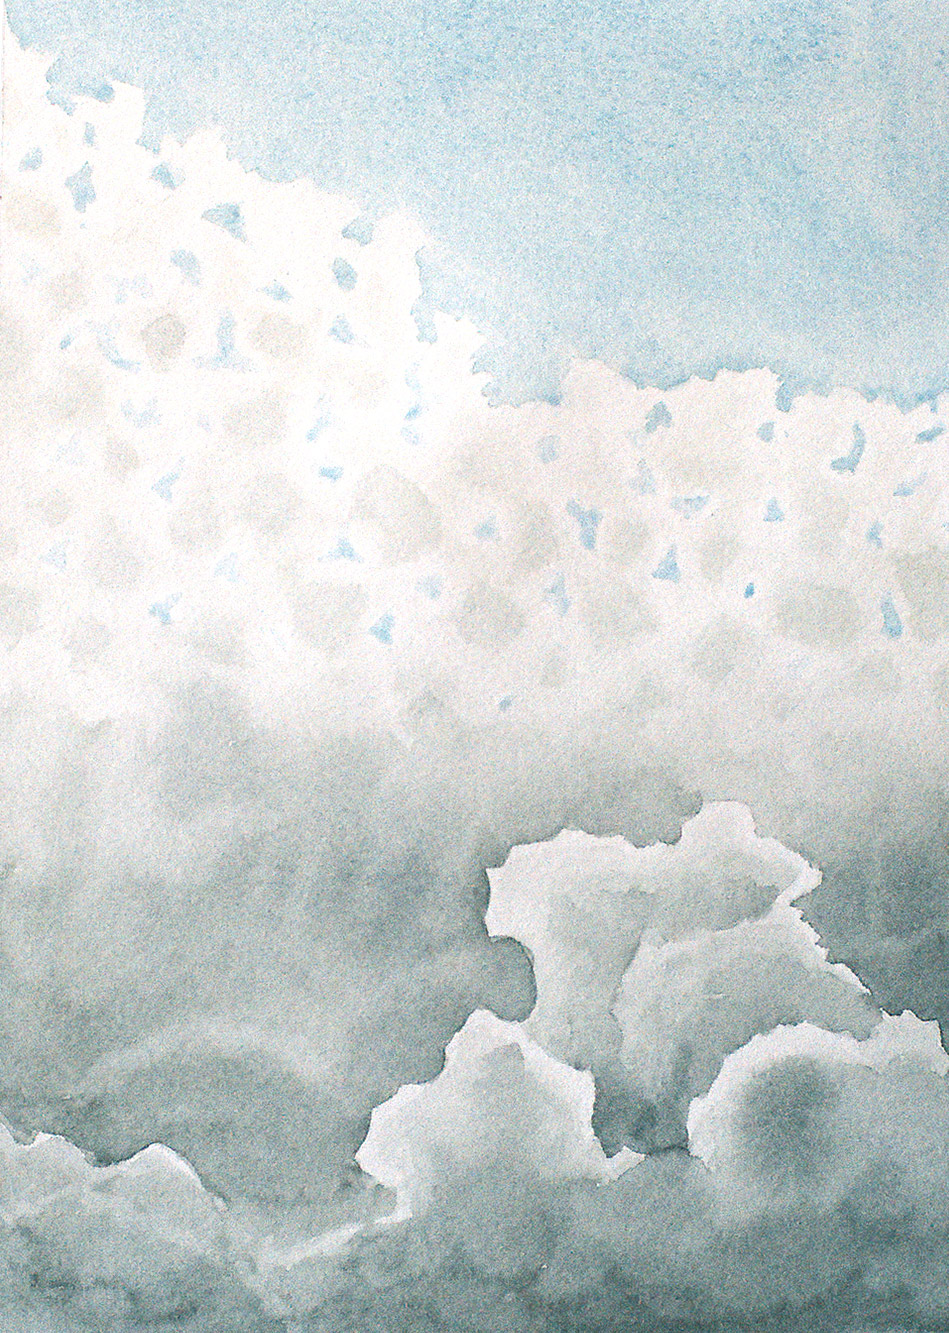 Visiting watercolorist Ponemone offers students a new way of looking at skies and rendering them.